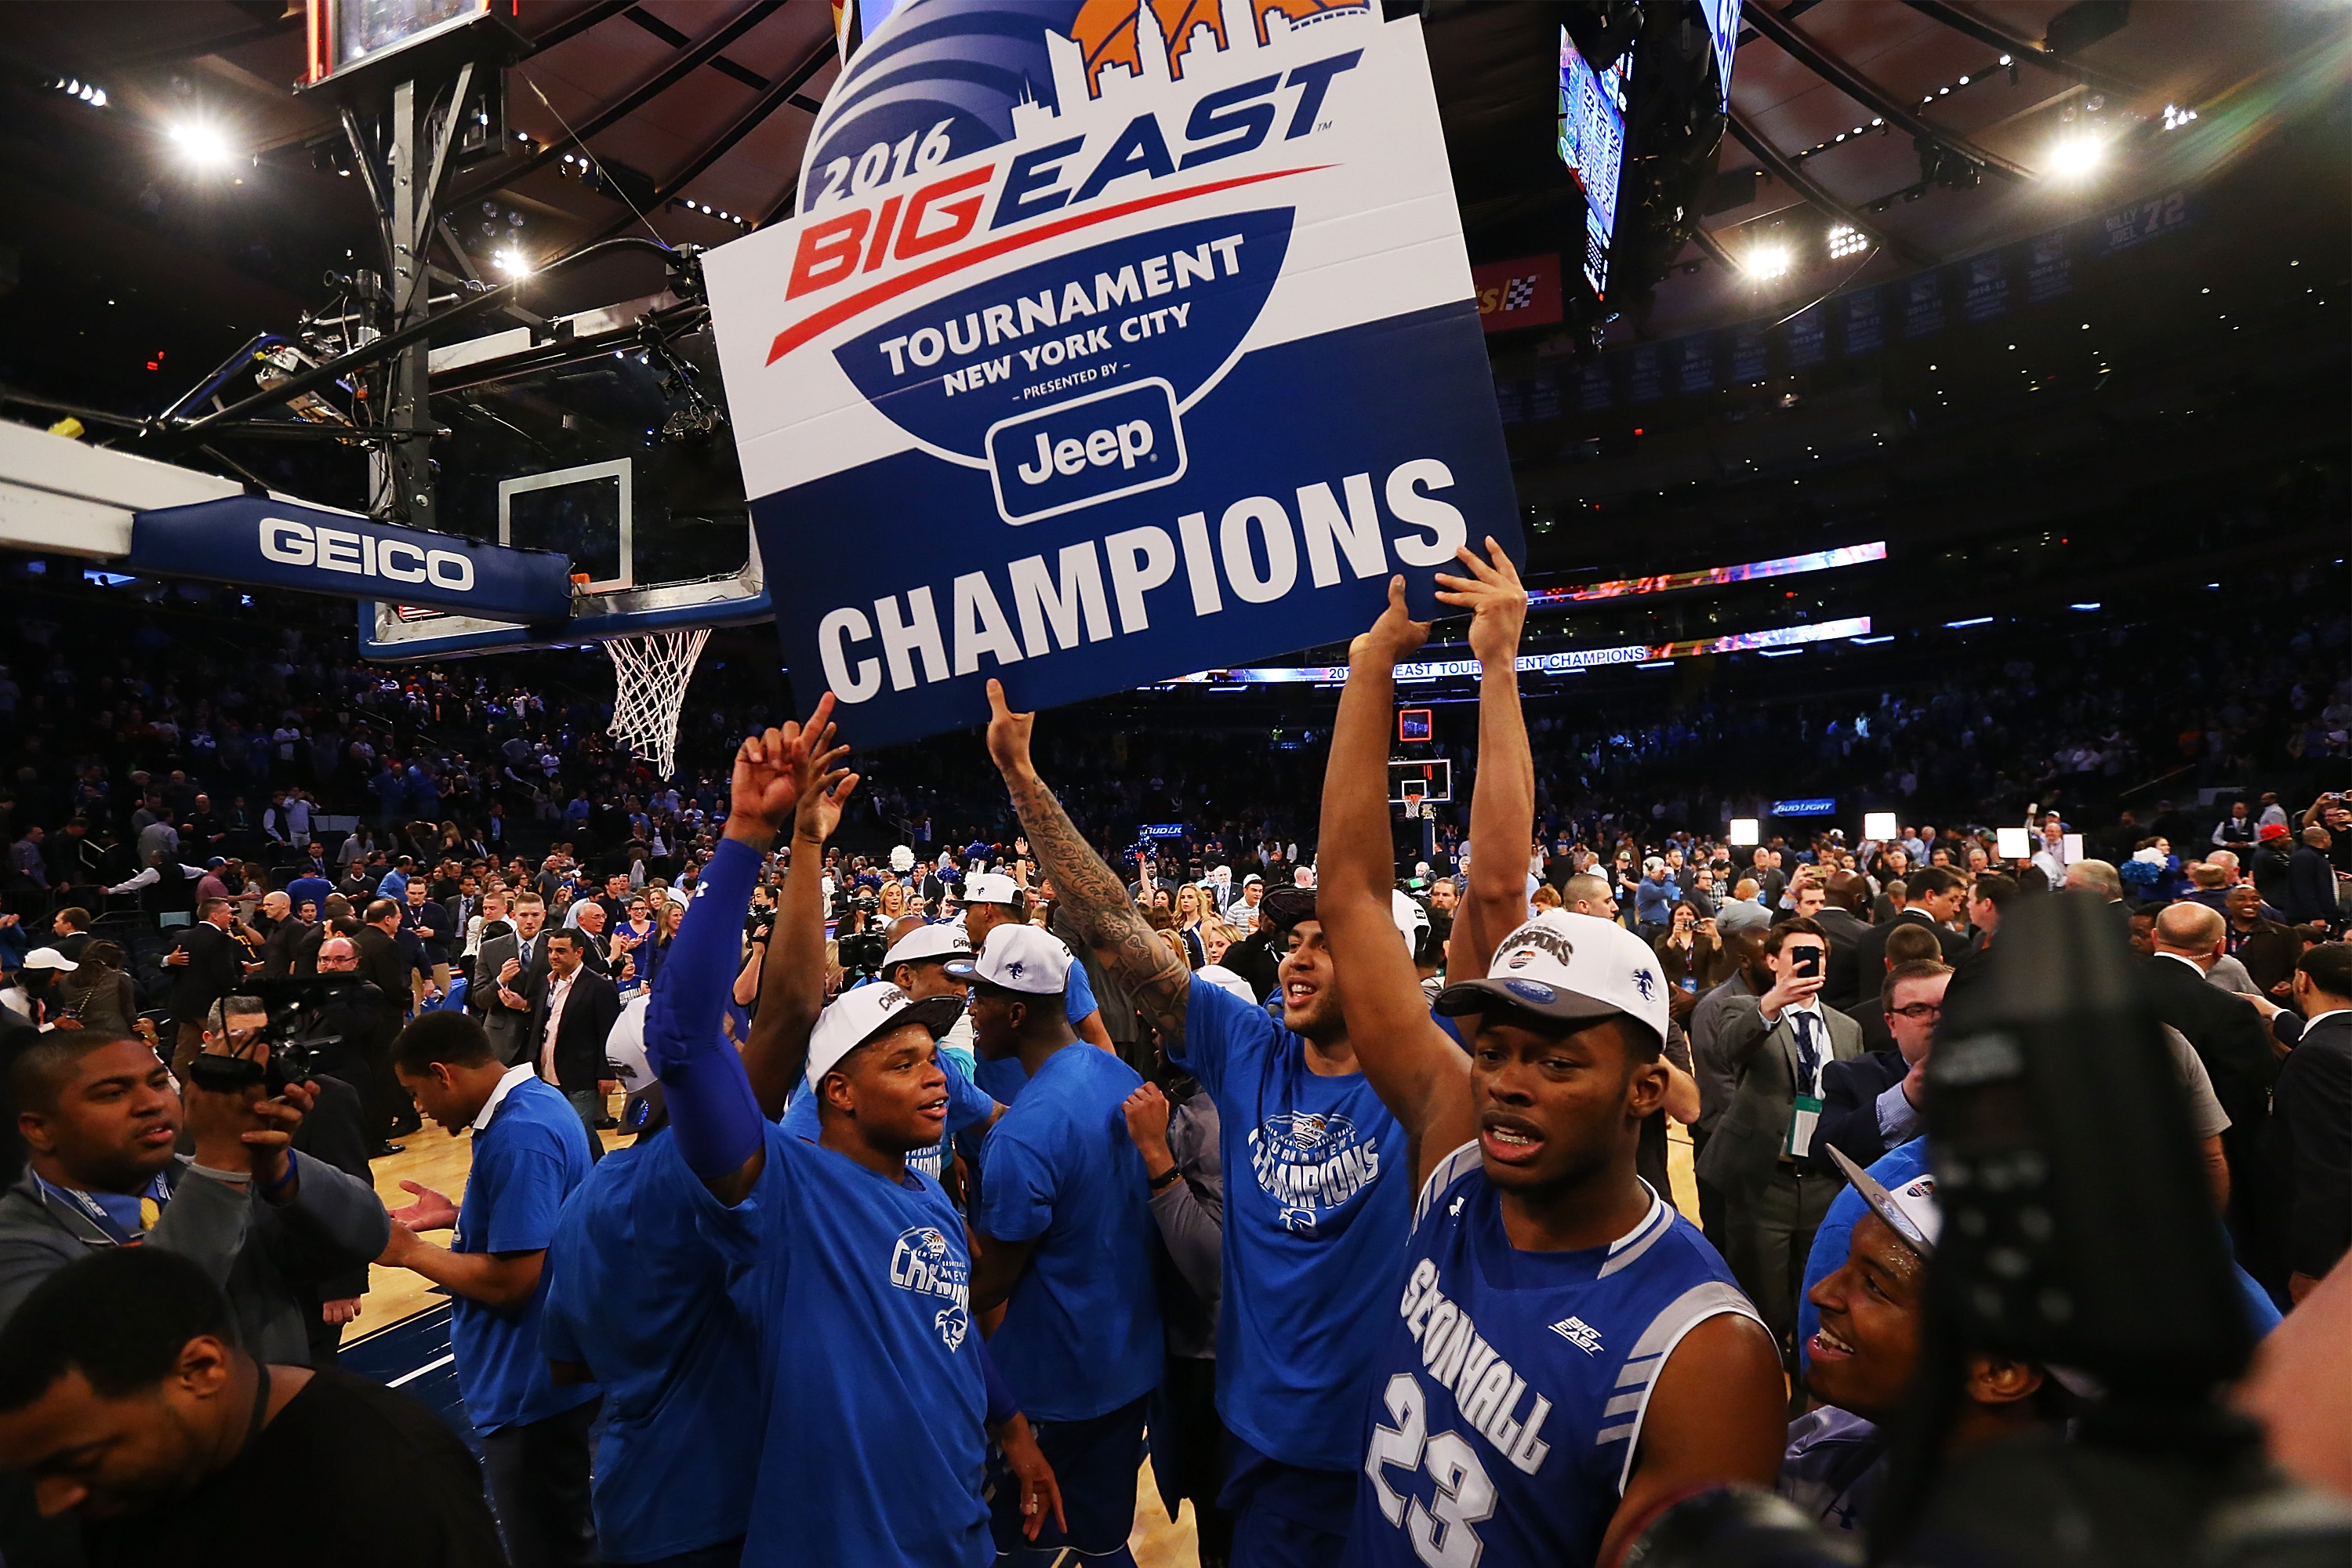 NEW YORK, NY - MARCH 12: Seton Hall Pirates celebrates after defeating the Villanova Wildcats to win the Big East Basketball Tournament Championship at Madison Square Garden on March 12, 2016 in New York City. Seton Hall Pirates defeated Villanova Wildcats 69-67. (Photo by Mike Stobe/Getty Images)